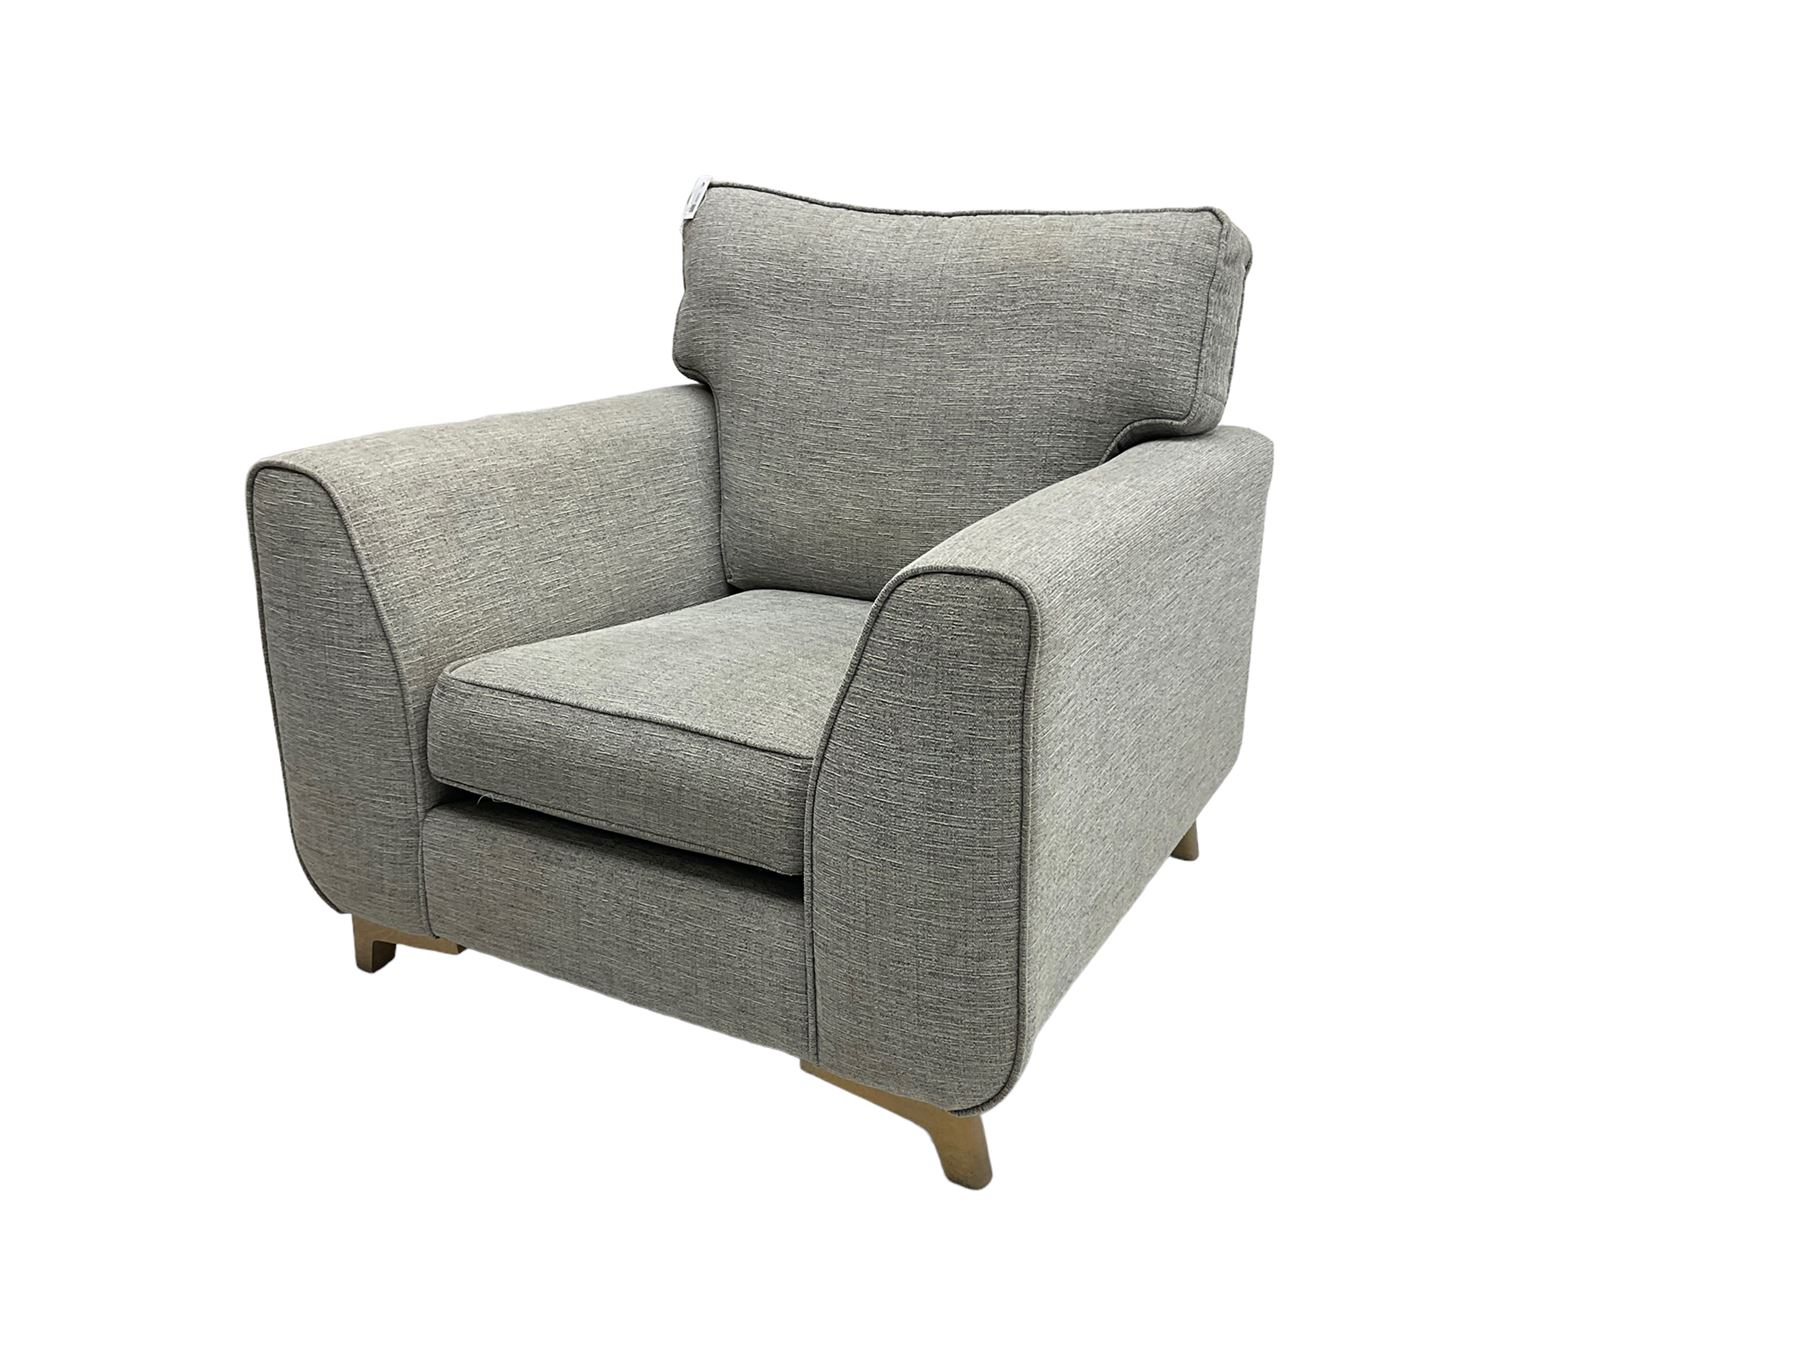 Armchair upholstered in graphite grey fabric - Image 5 of 7